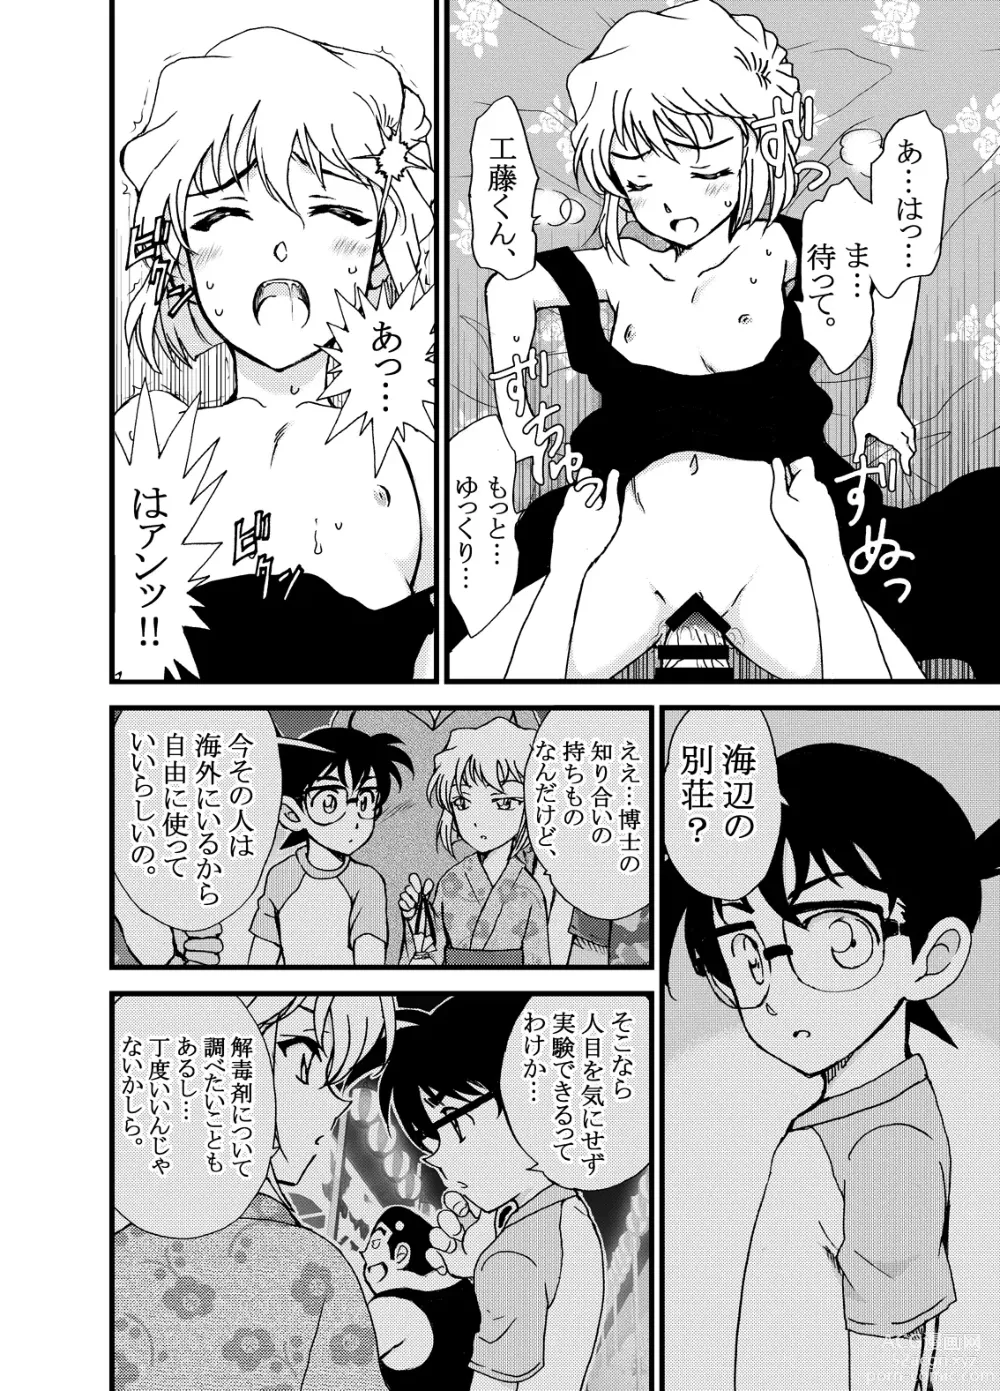 Page 13 of doujinshi Summer Resort Preview